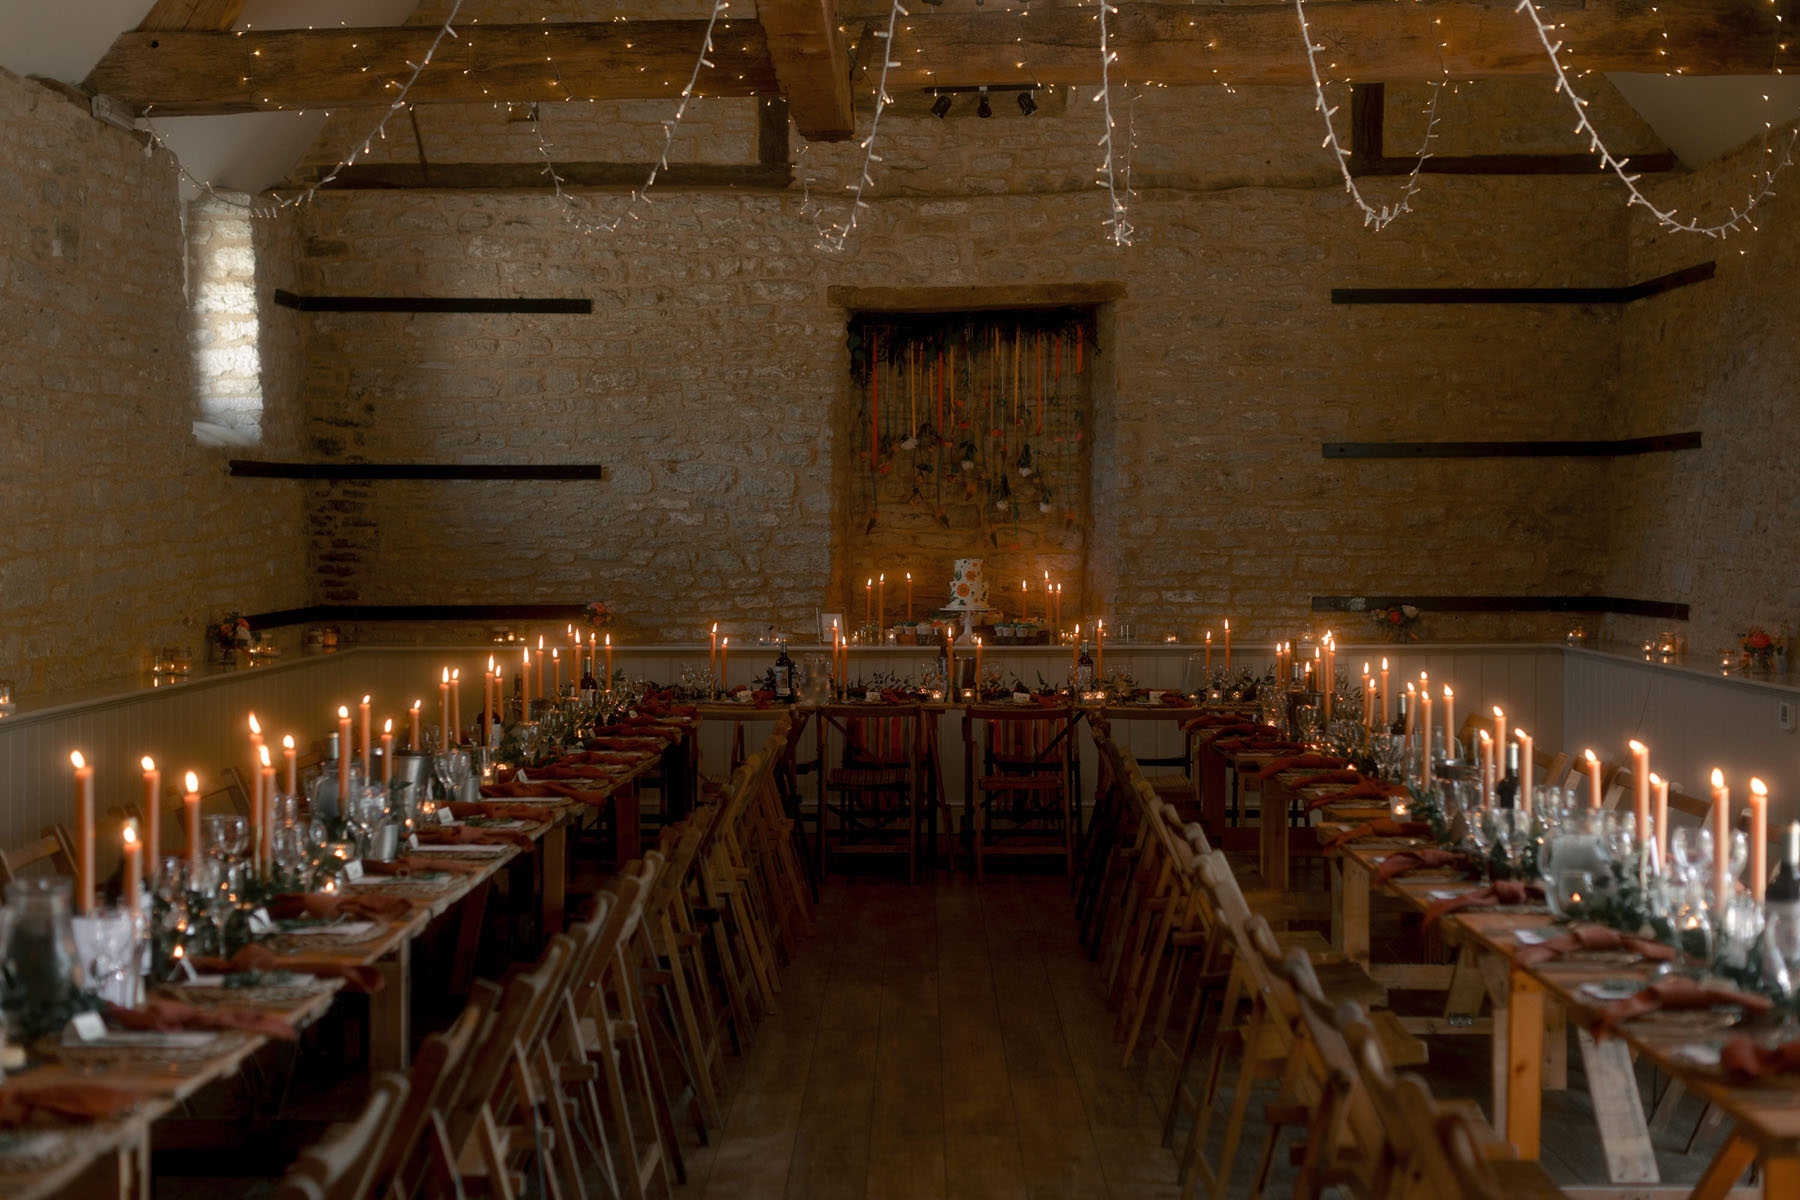 Candlelit barn wedding reception with fairylight canopy hanging over the table. Wick Farm, Bath.